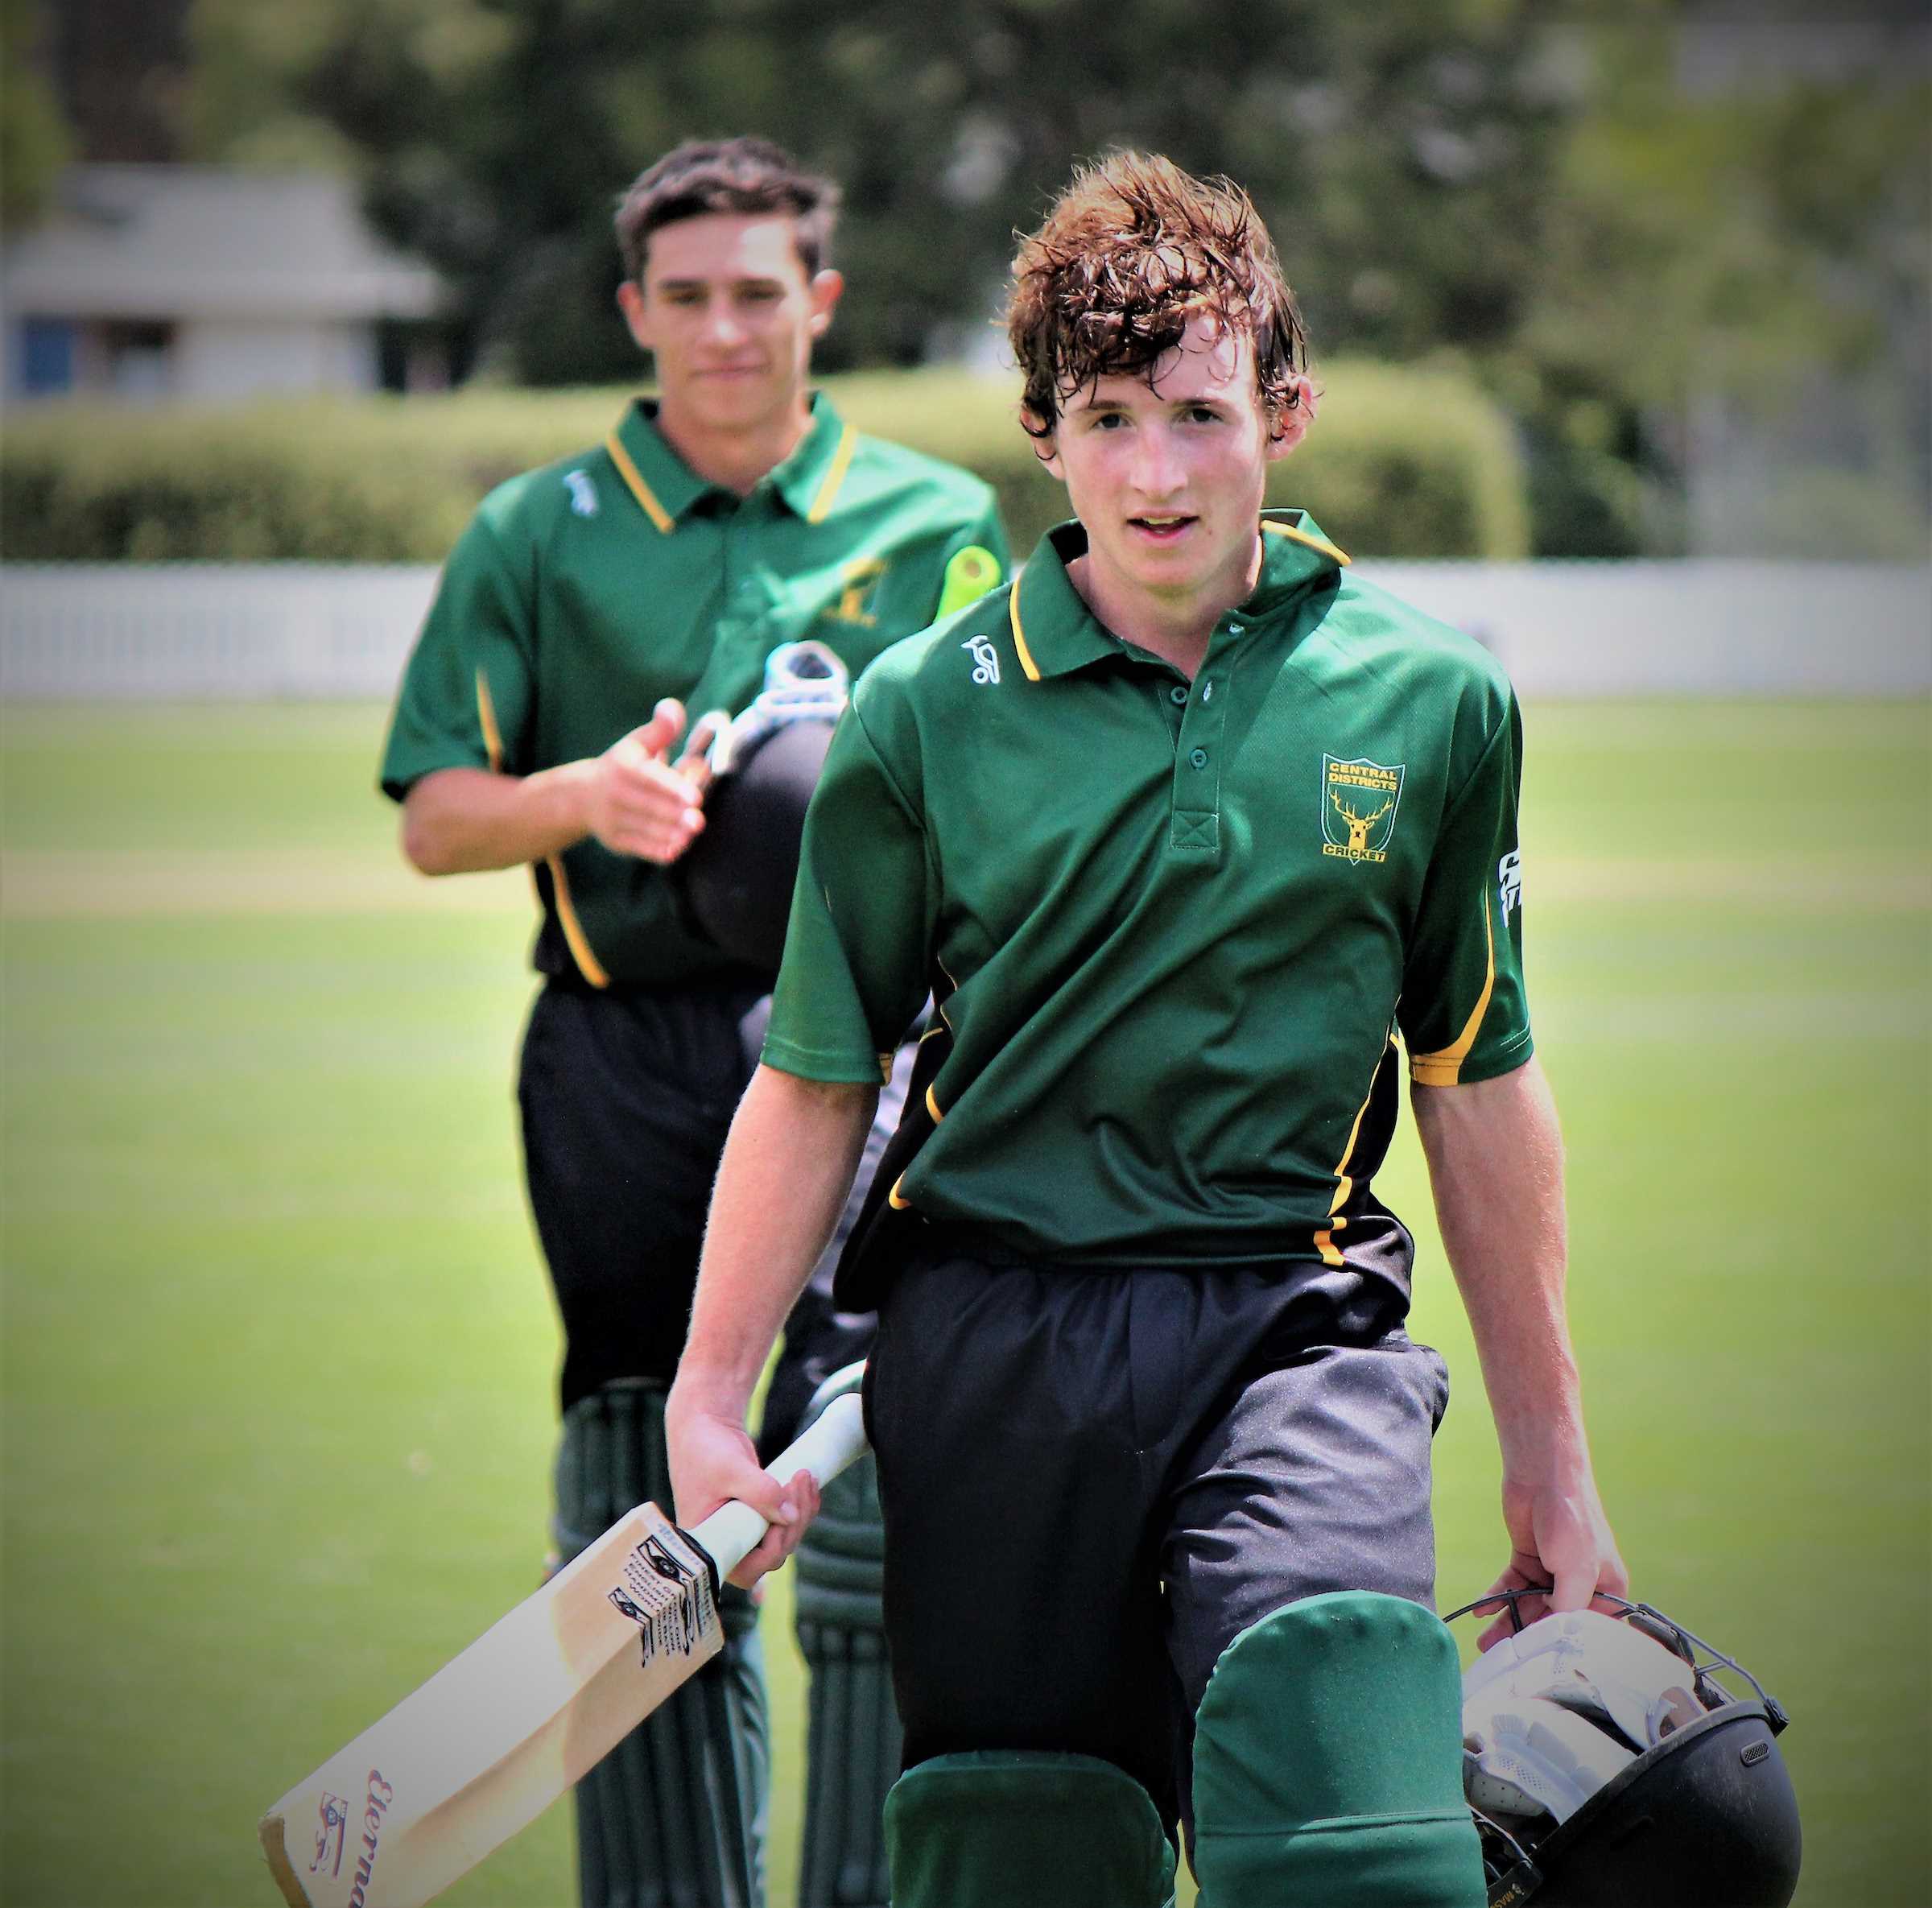 Young Central Districts batsman Sam Ferguson after scoring a rare double century at NZC's Under-17 national championships, carrying his bat for an innings of 200 not out at Lincoln's Bert Sutcliffe Oval on 20 January 2019.
Round 3 of the NZC U17 National Tournament, Central Districts U17 v Otago U17.